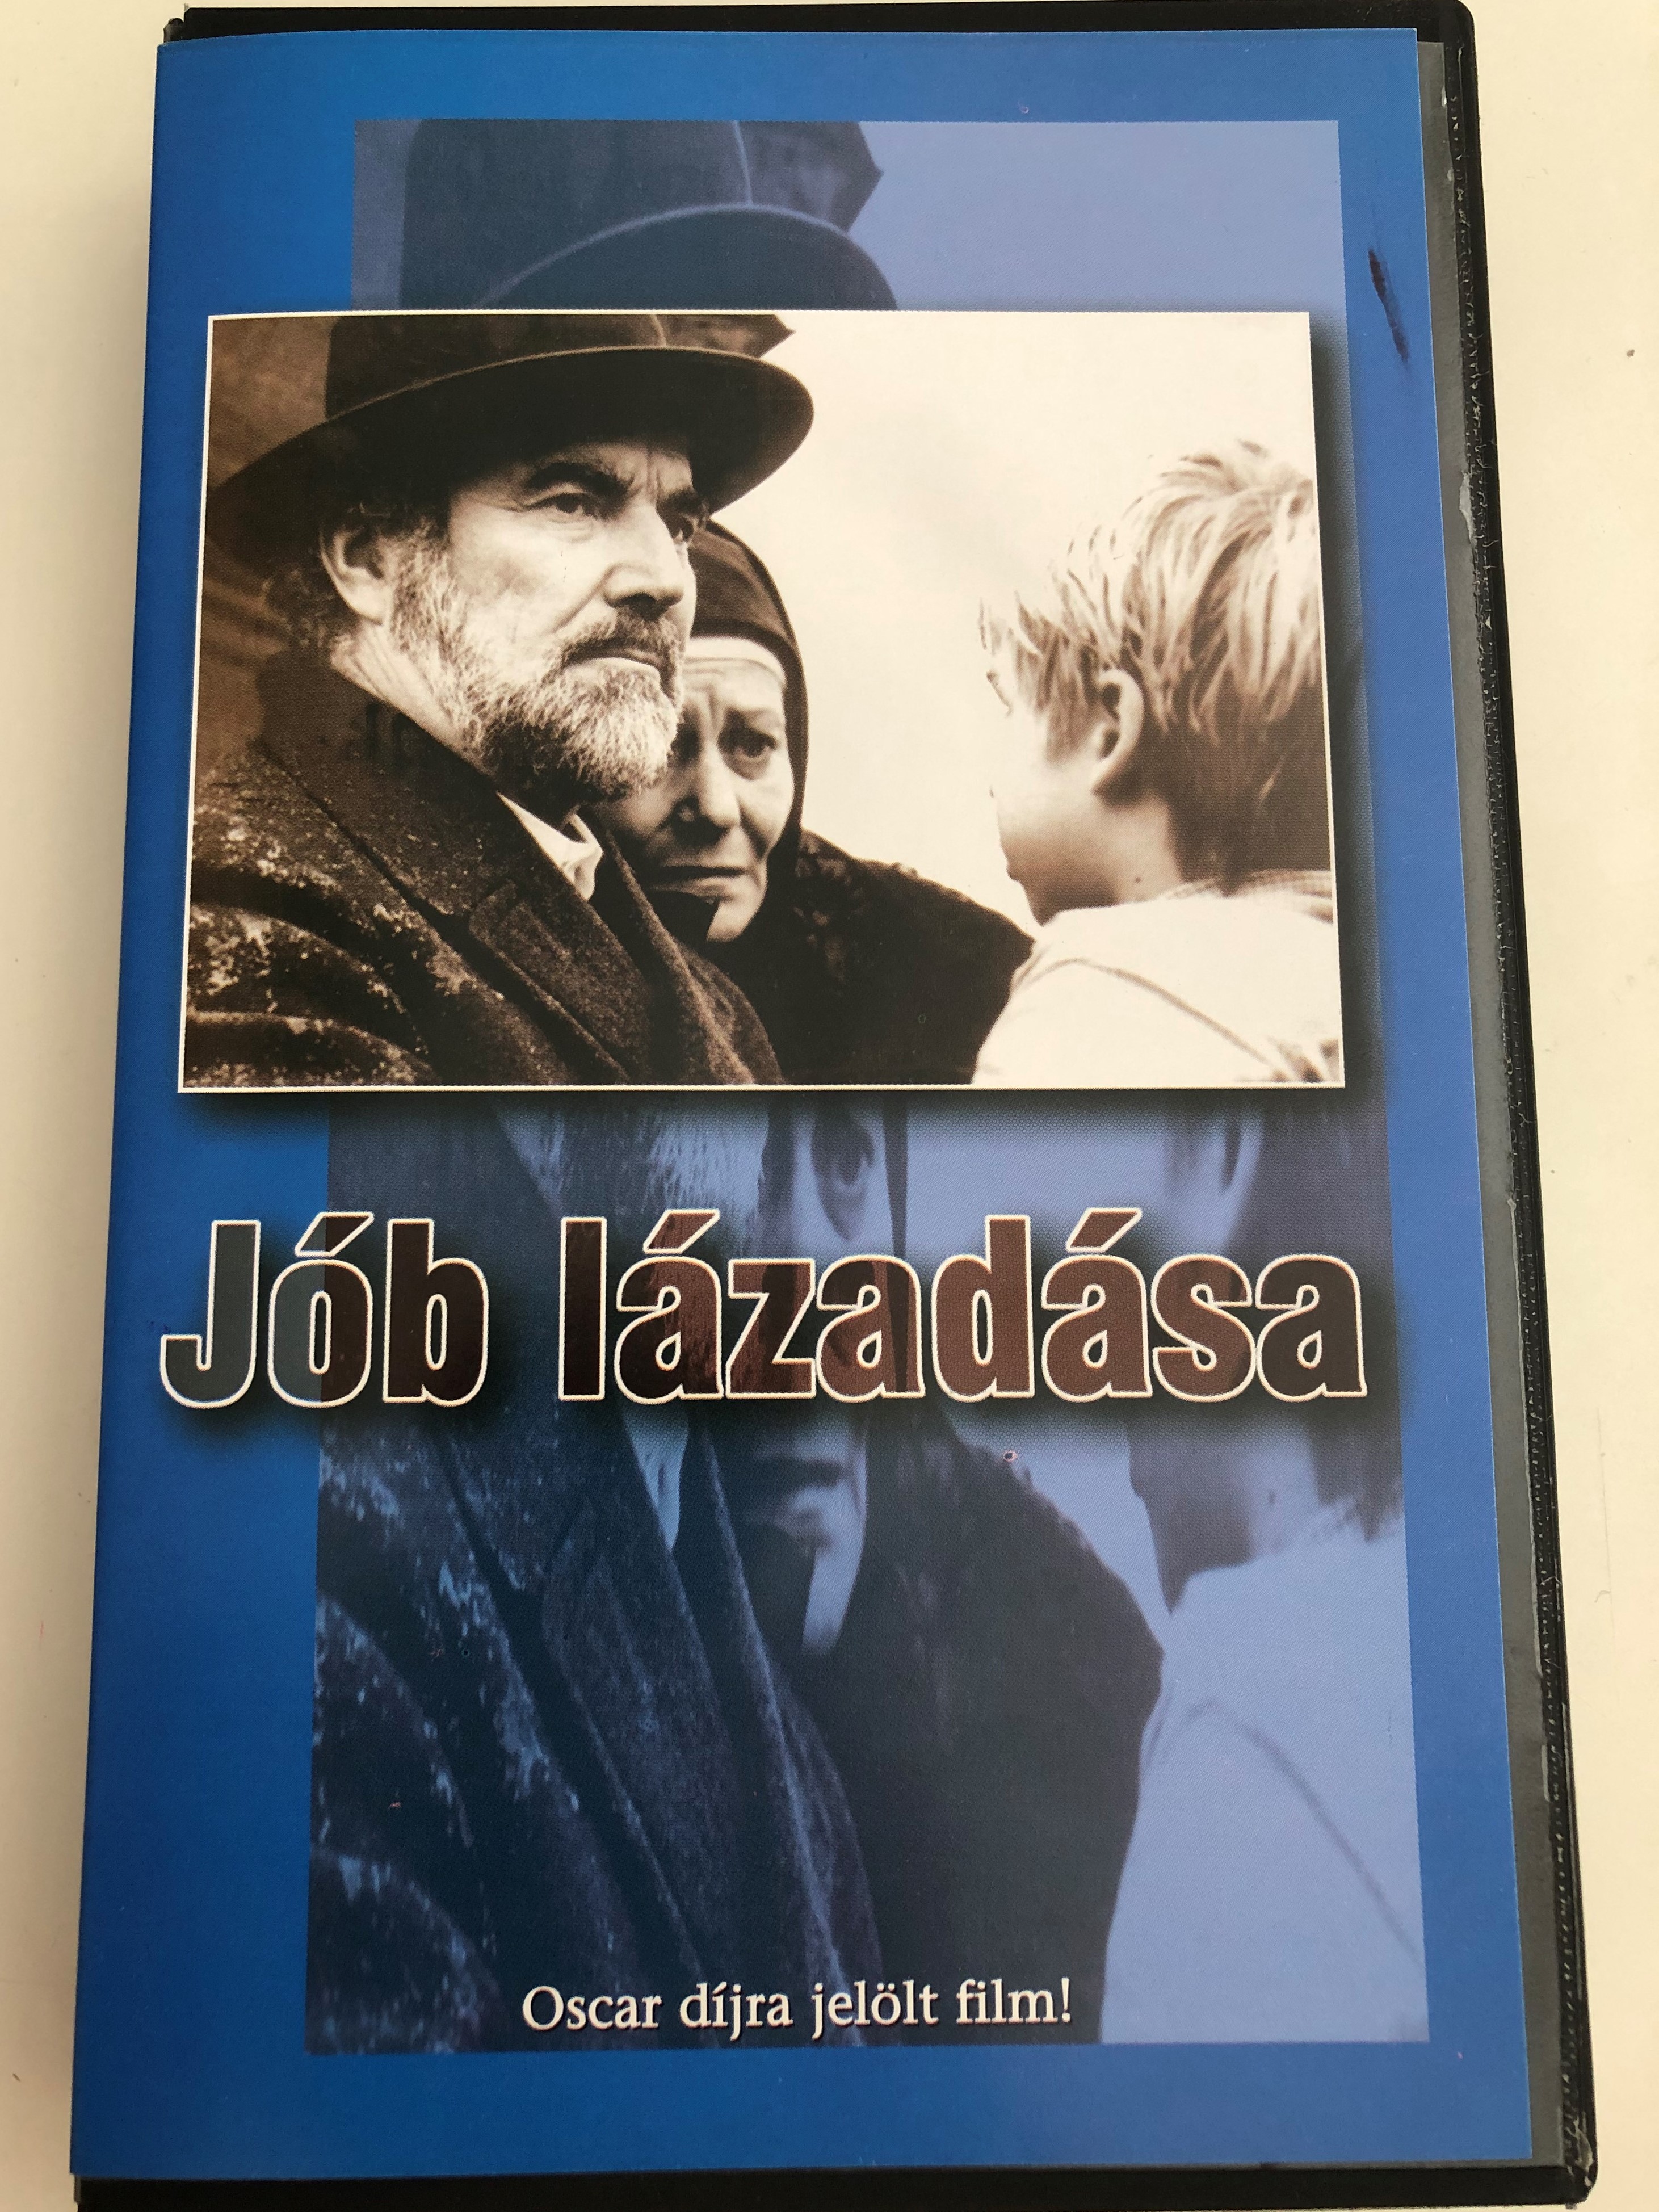 j-b-l-zad-sa-vhs-1983-the-revolt-of-job-directed-by-imre-gy-ngy-ssy-kabay-barna-starring-zenthe-ferenc-temessy-h-di-feh-r-g-bor-1-.jpg